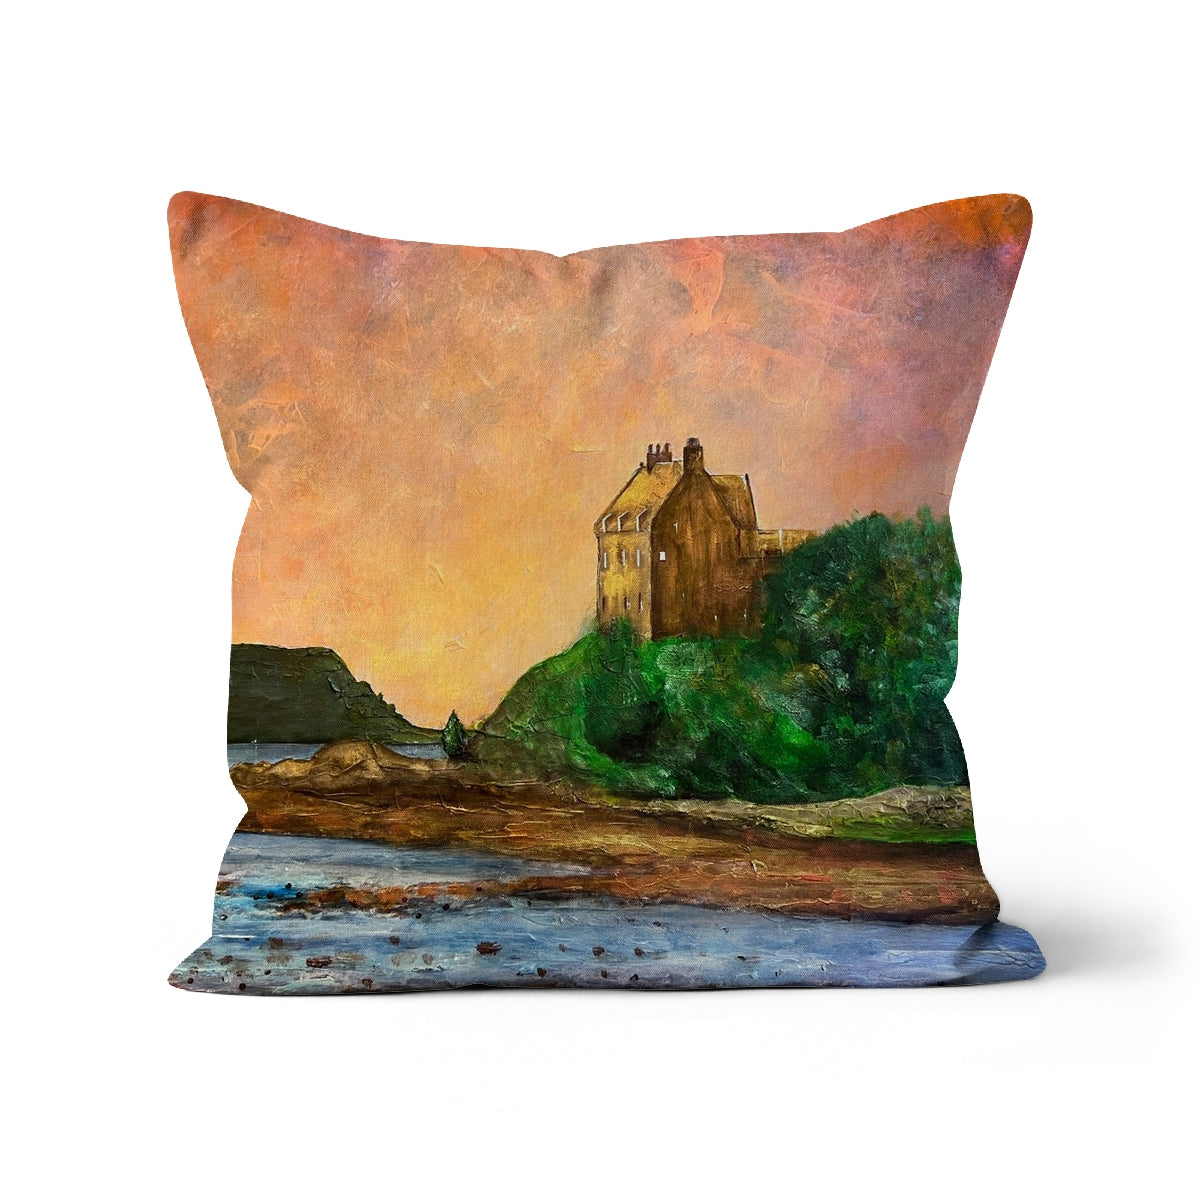 Duntrune Castle Art Gifts Cushion-Cushions-Historic & Iconic Scotland Art Gallery-Linen-18"x18"-Paintings, Prints, Homeware, Art Gifts From Scotland By Scottish Artist Kevin Hunter